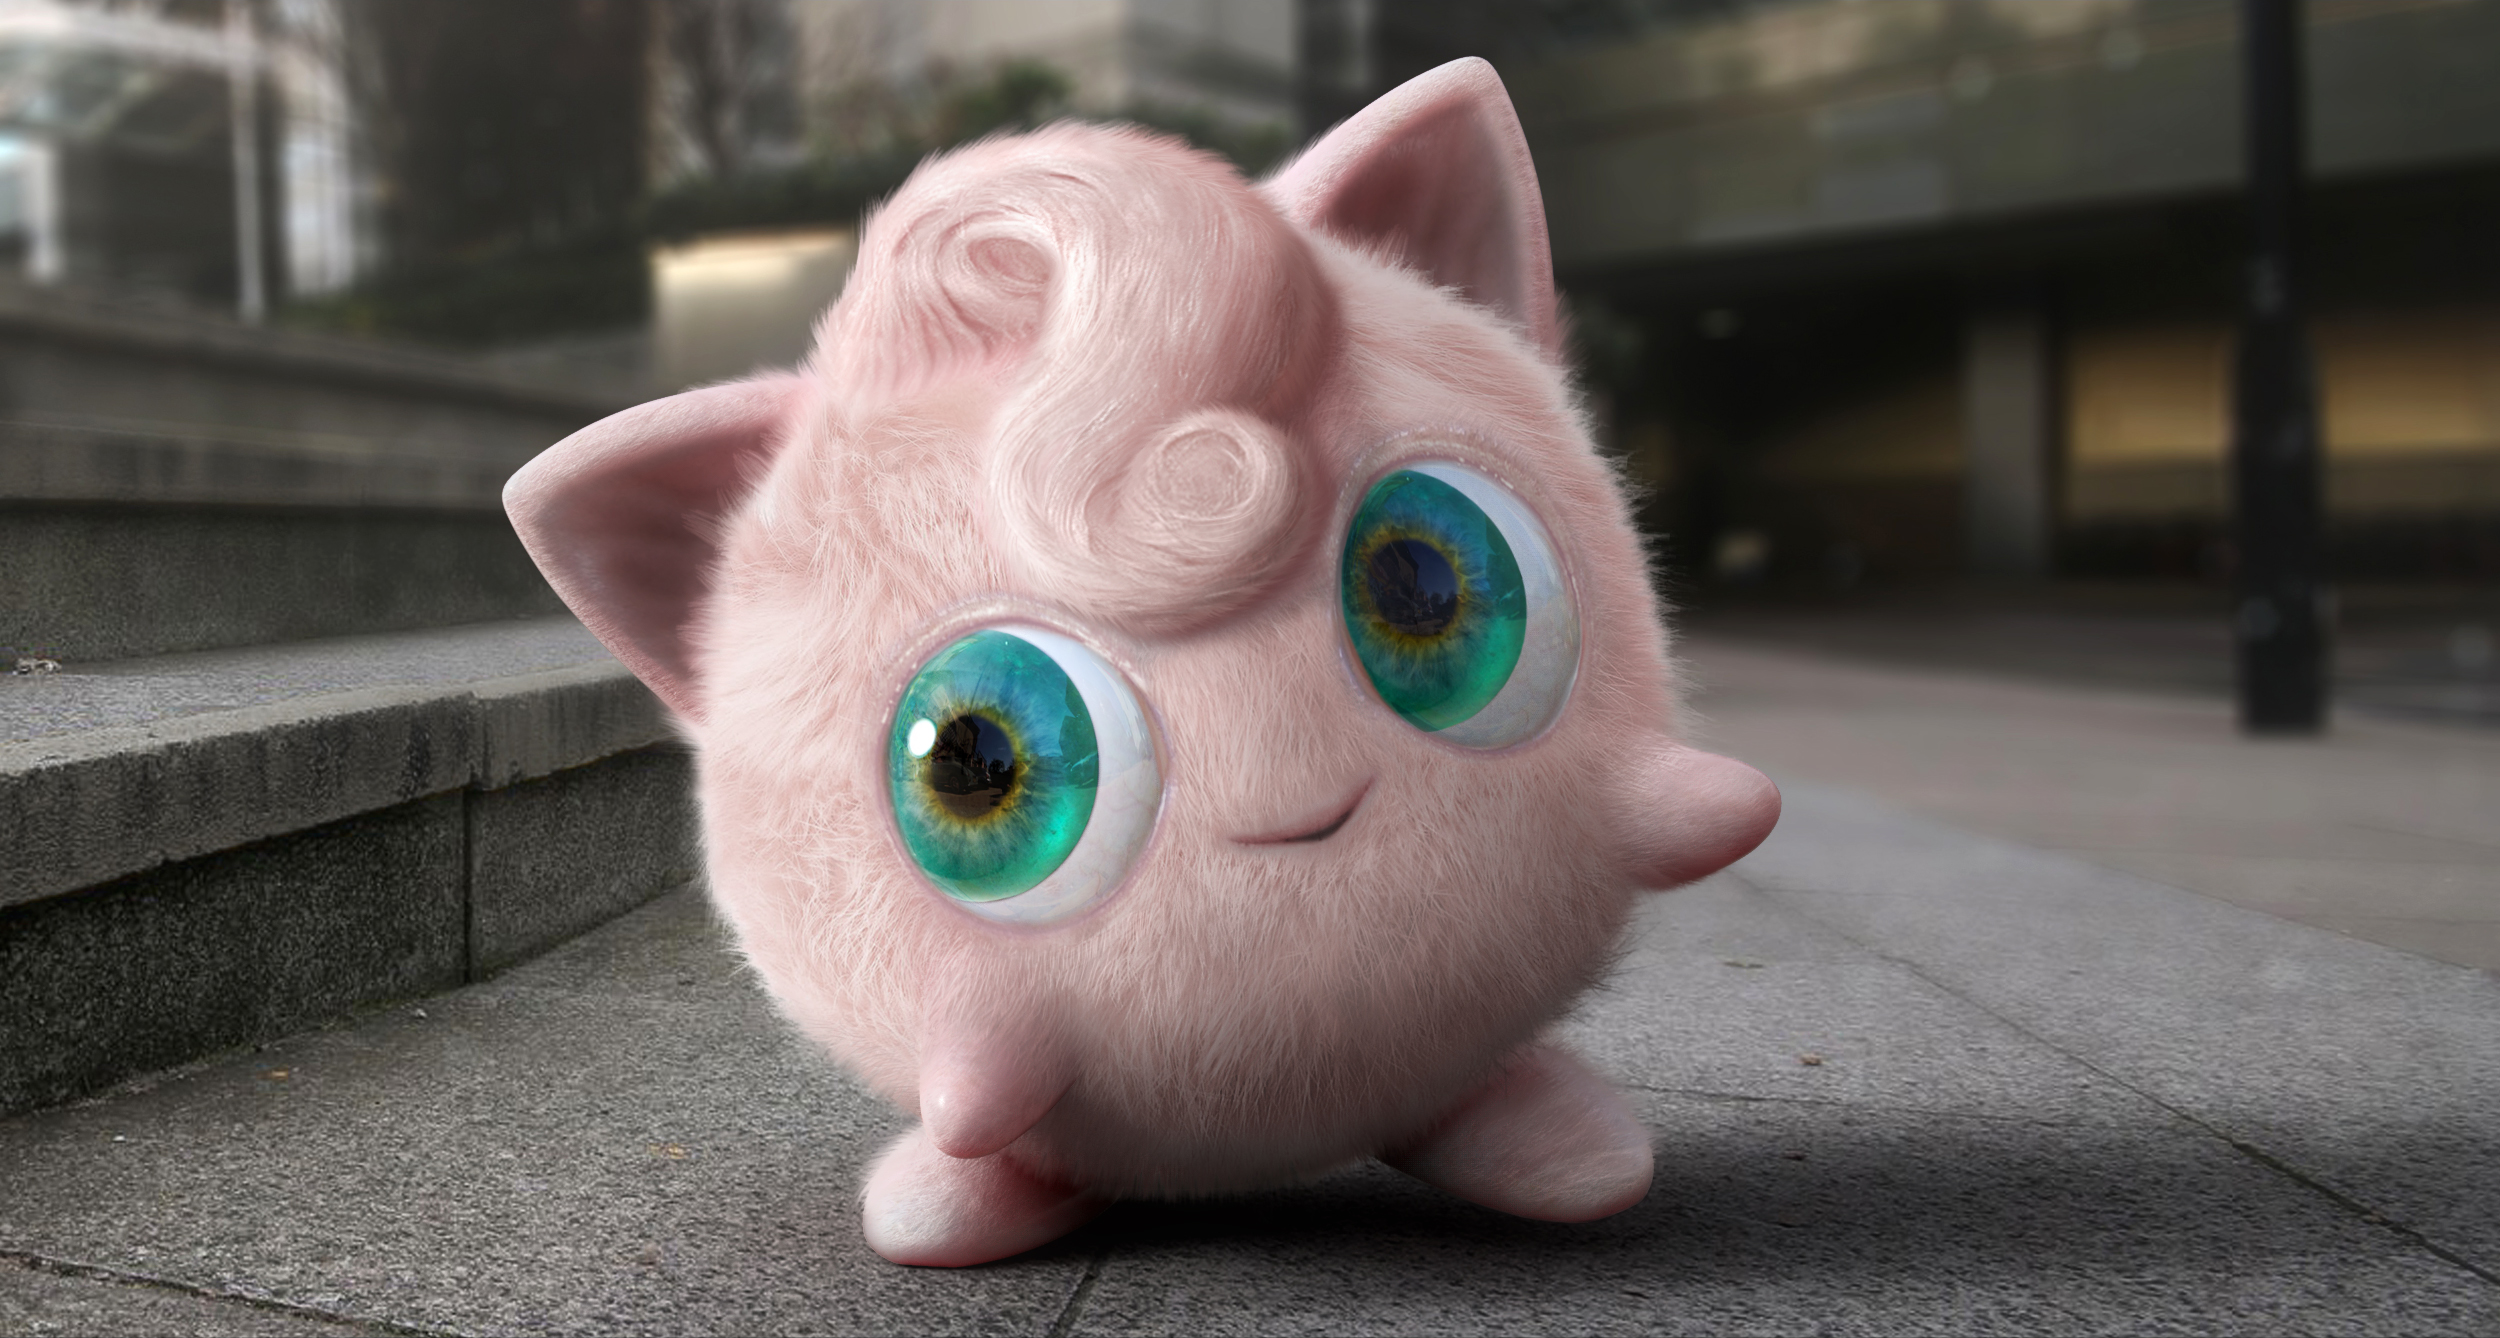 Concept art of Jigglypuff (Courtesy of Warner Bros. Pictures)